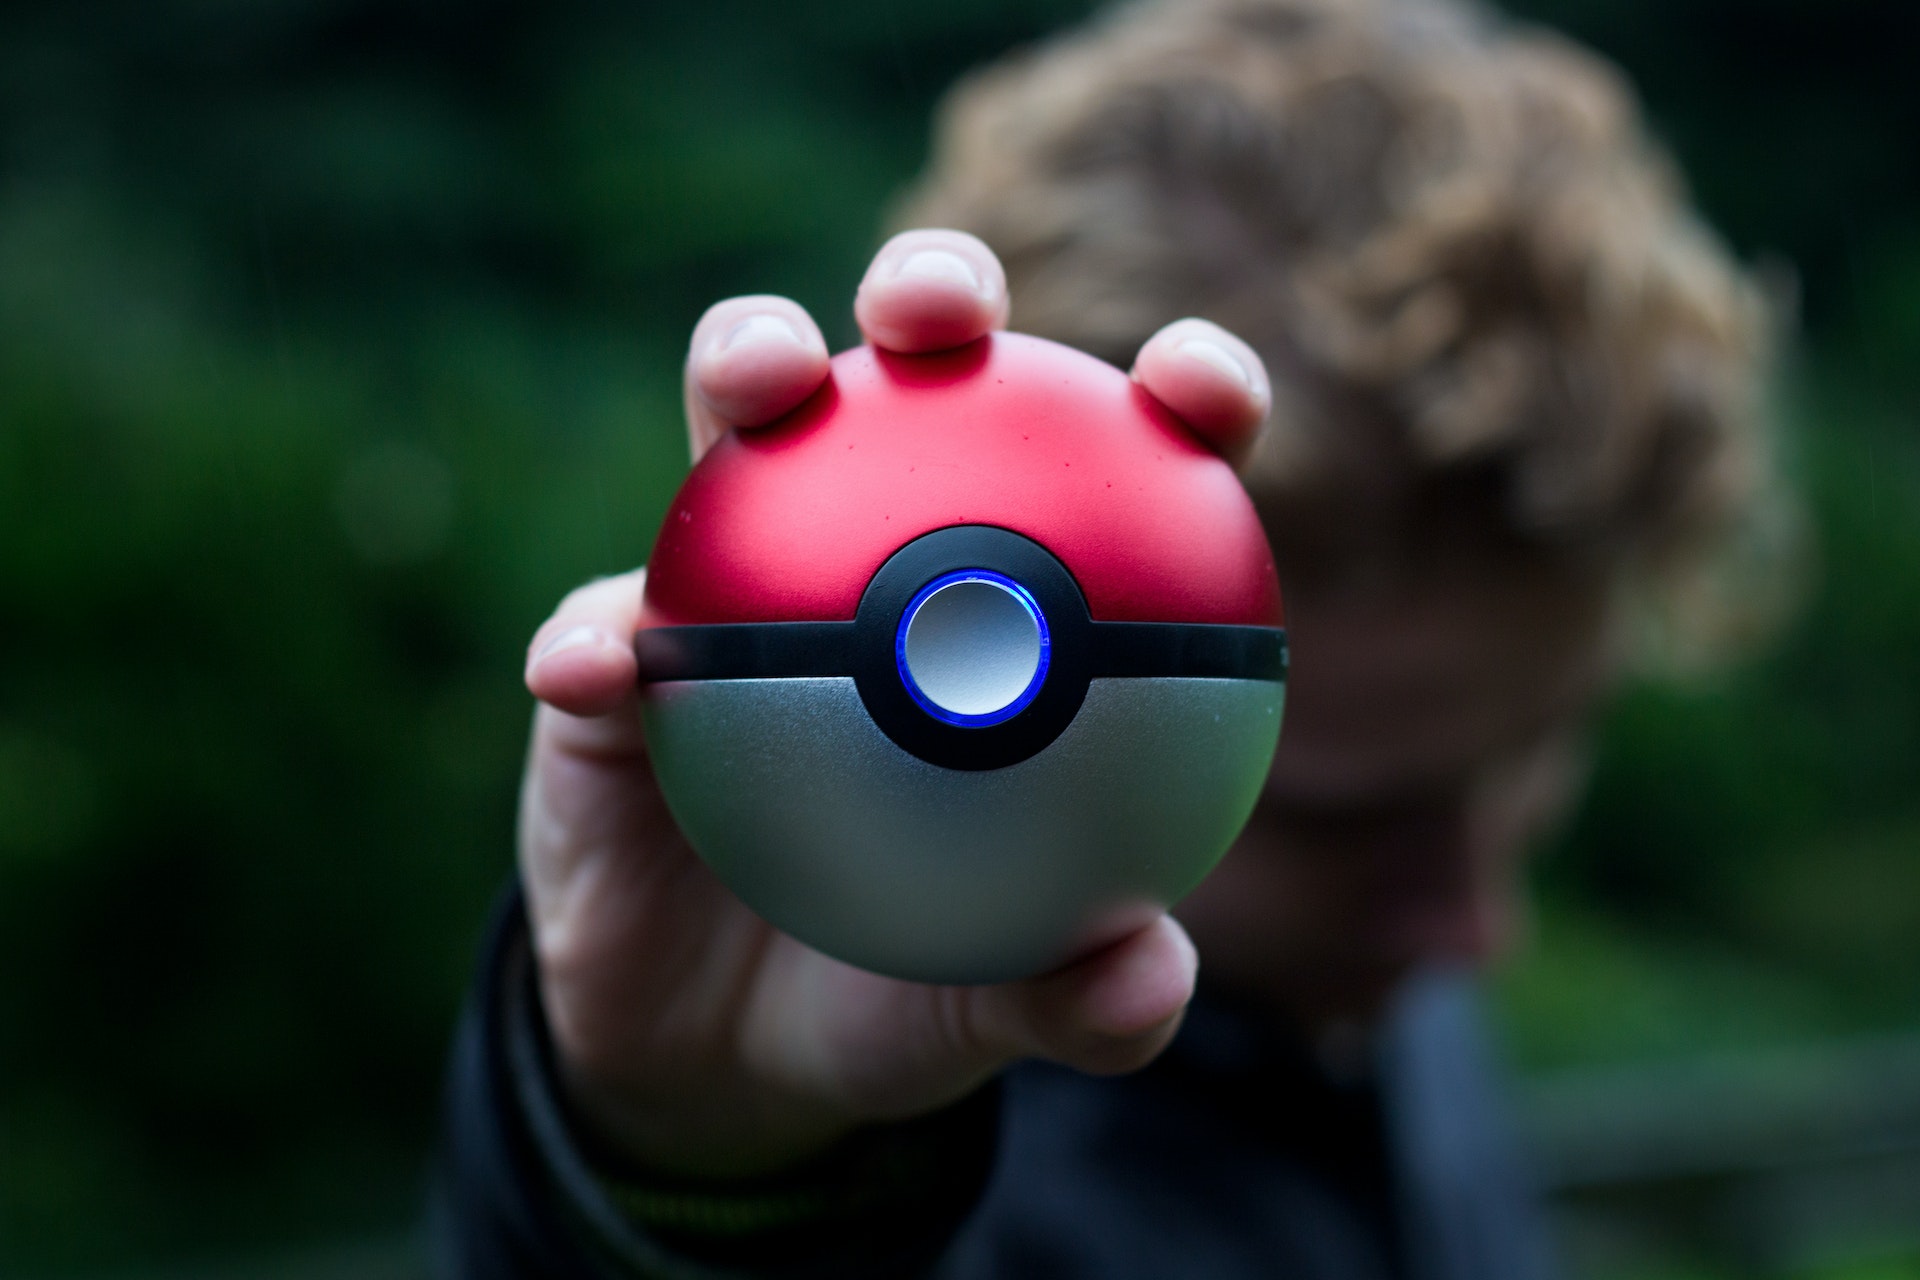 image of a person holding a poke ball